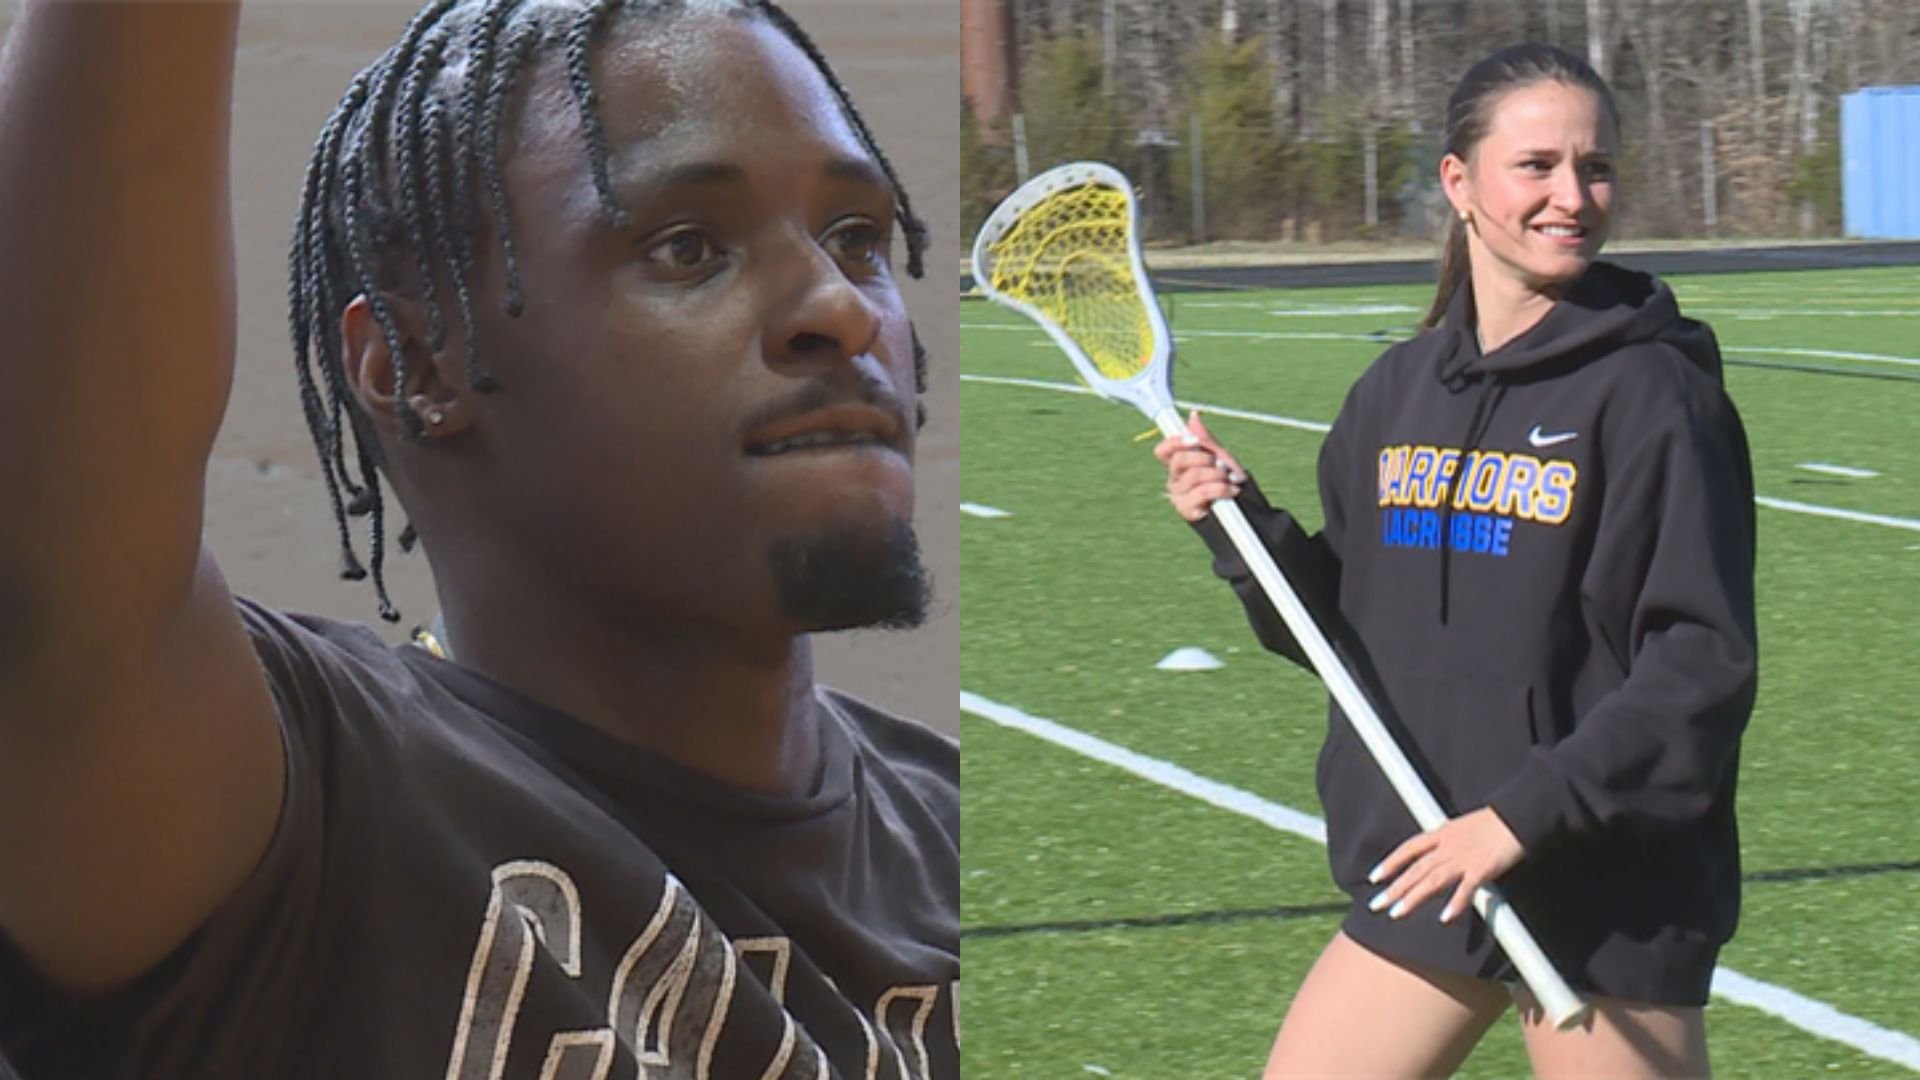 Clarke Jr., Murphy named Airflow CBS19 Student Athletes of the Year – [Video]